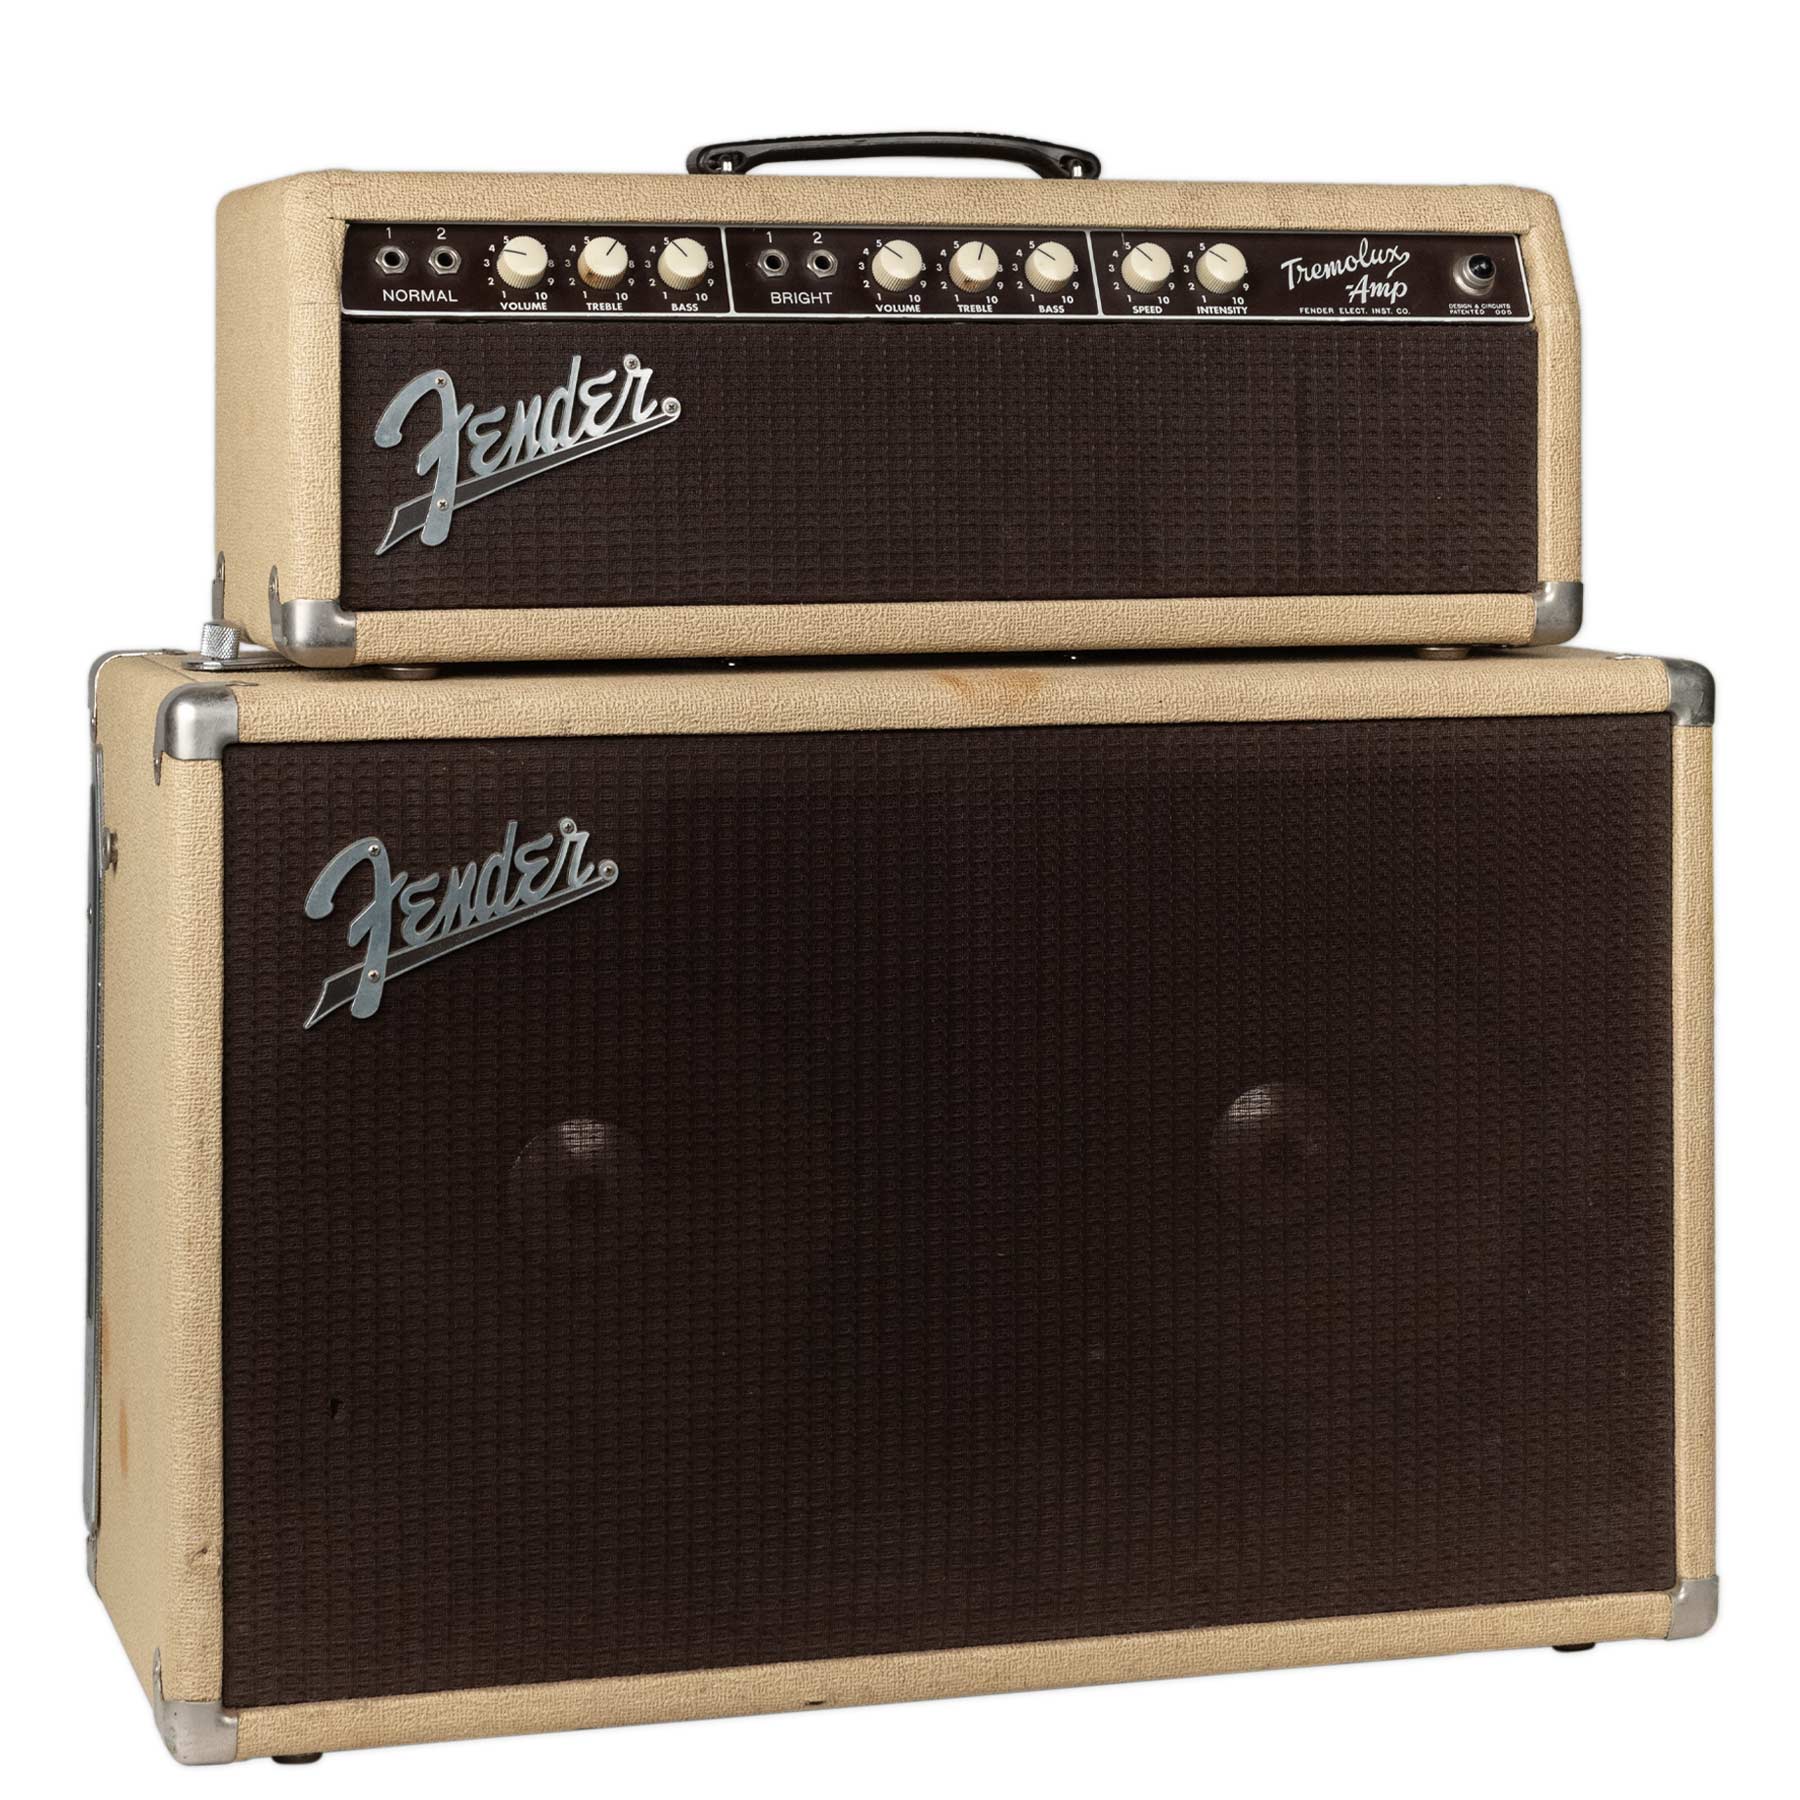 VINTAGE FENDER 1962 TREMOLUX AMP WITH MATCHING 2X10 CABINET